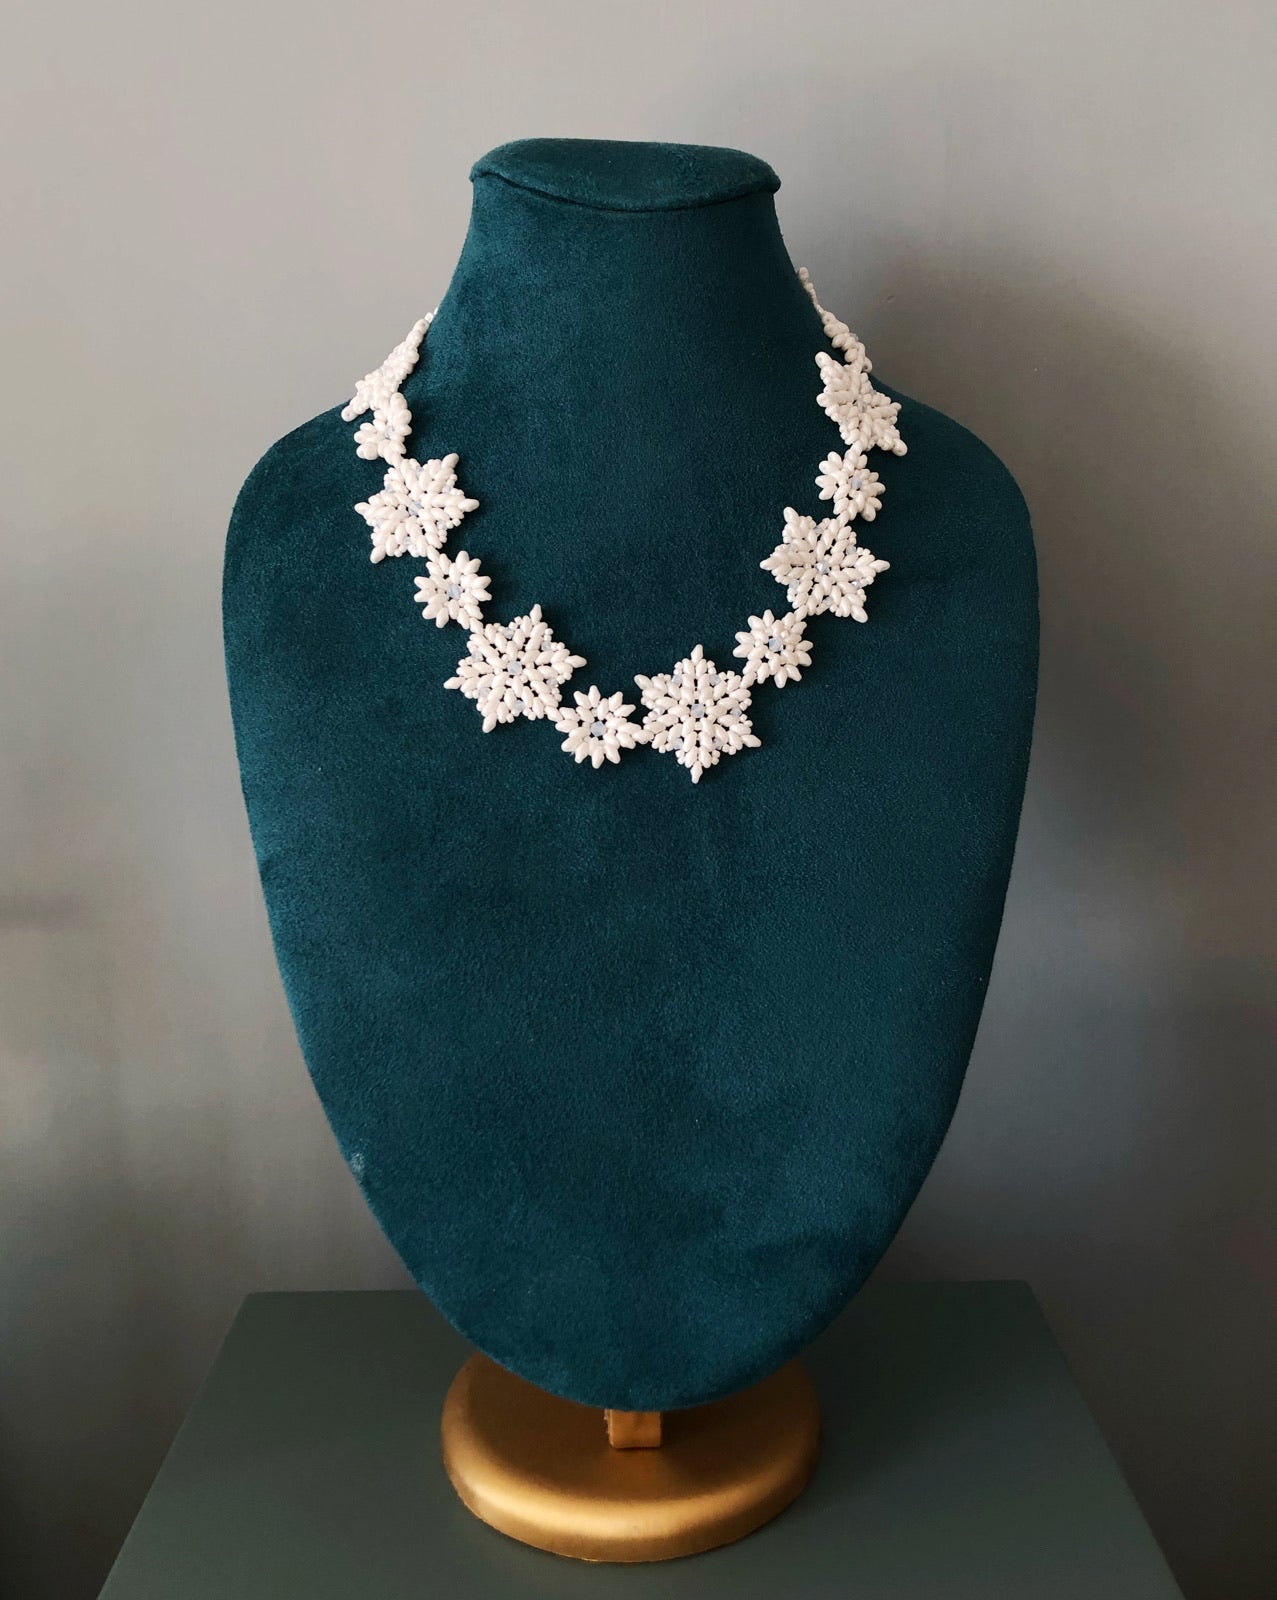 Snowflakes glass and crystals necklace in white